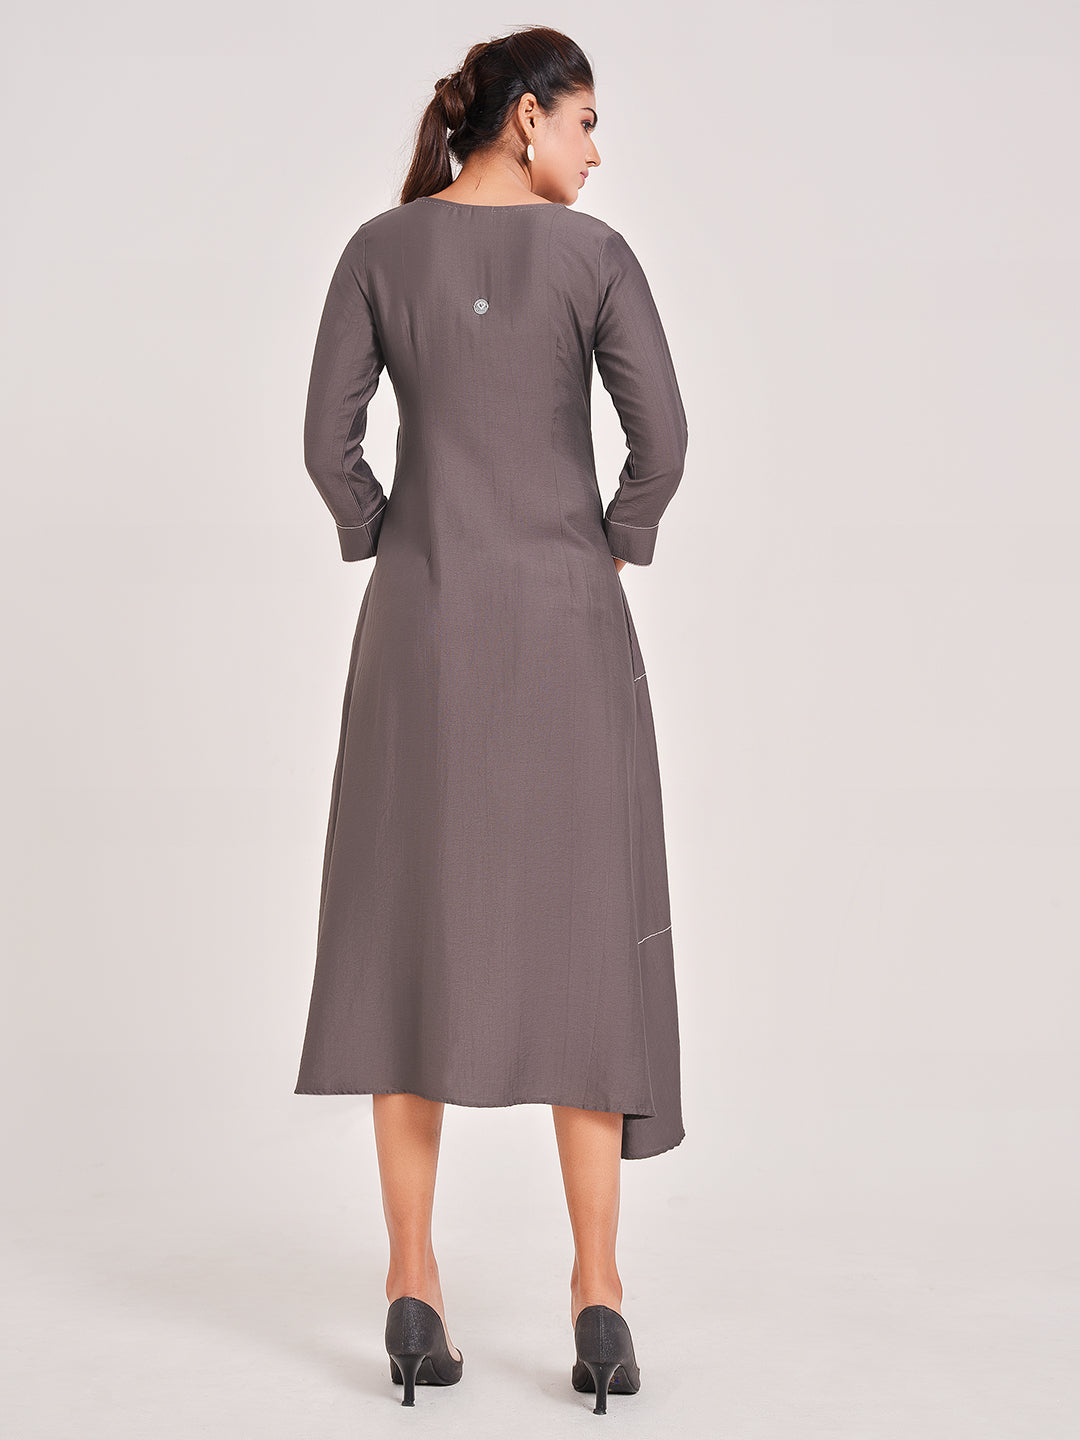 Rosy Brown Patch Work Dress - ARH827